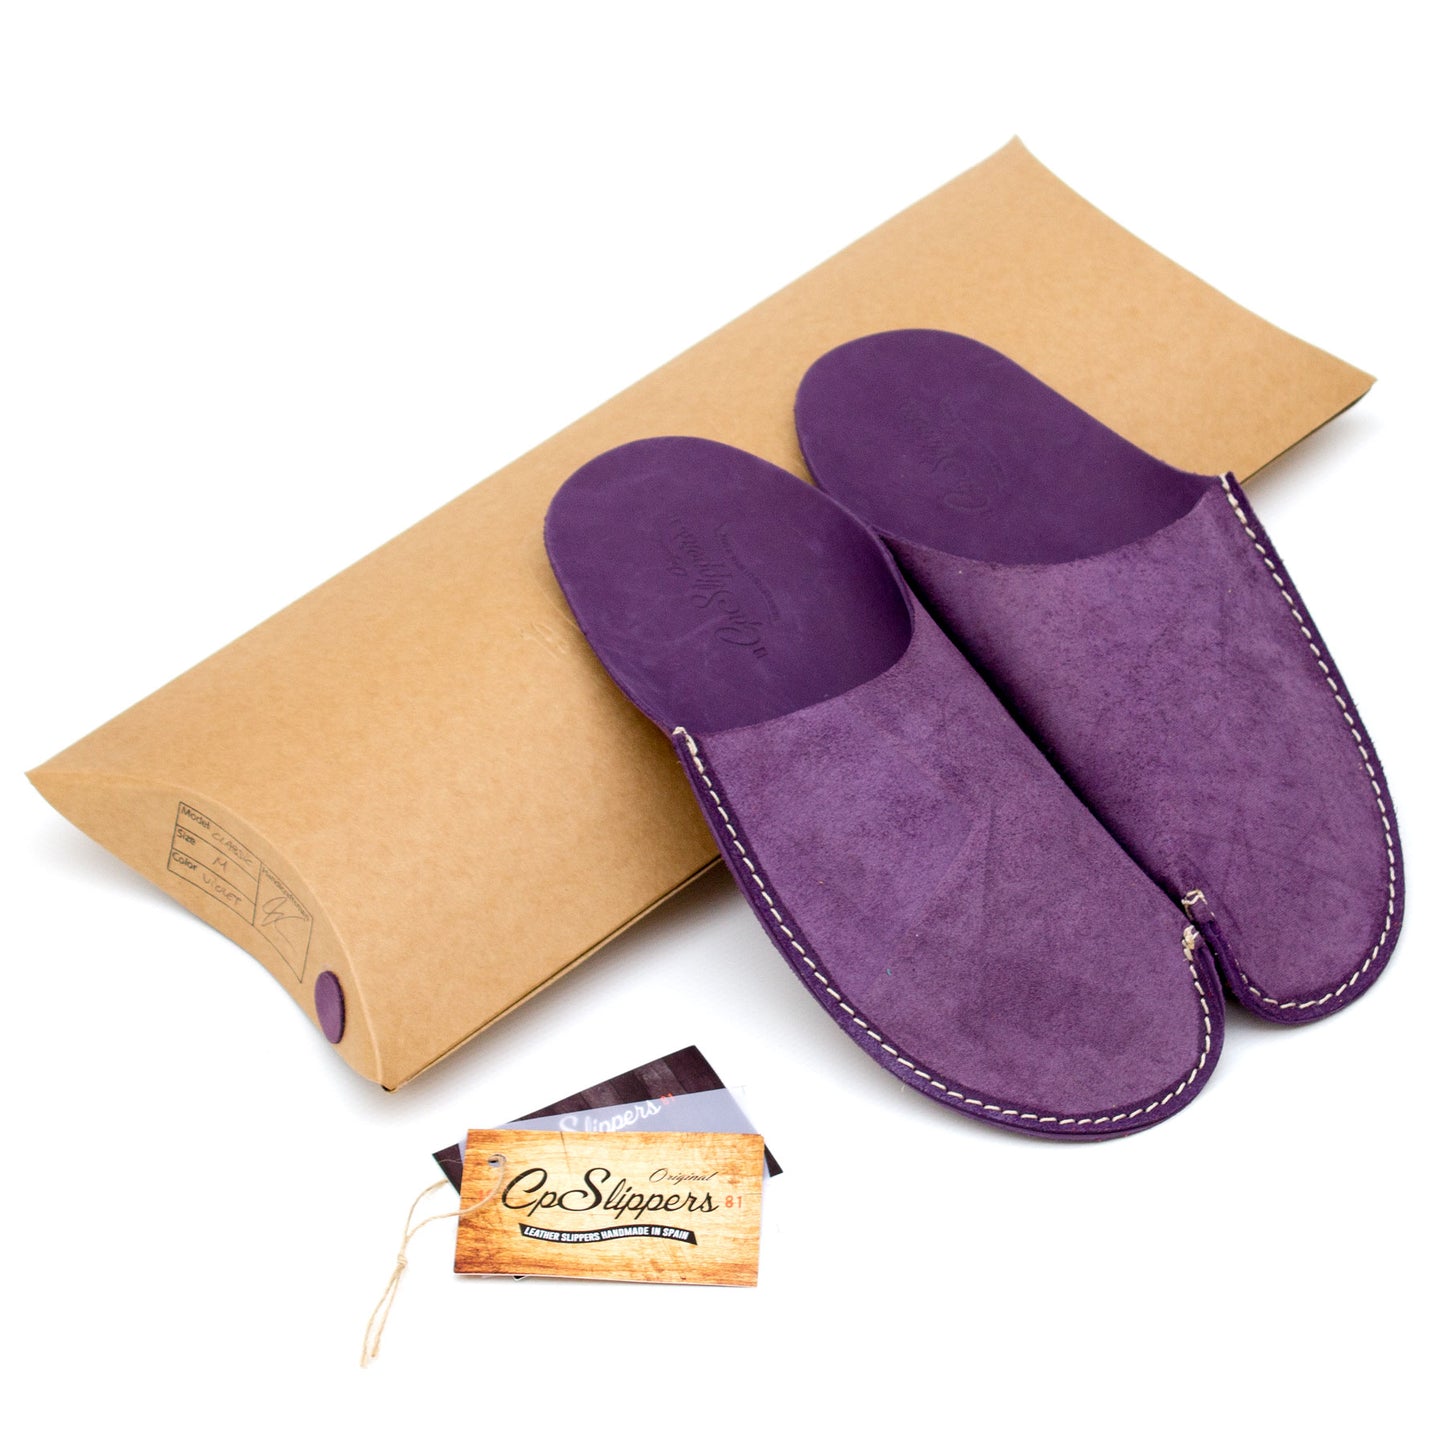 Violet CP Slippers Minimalist slippers for man and woman